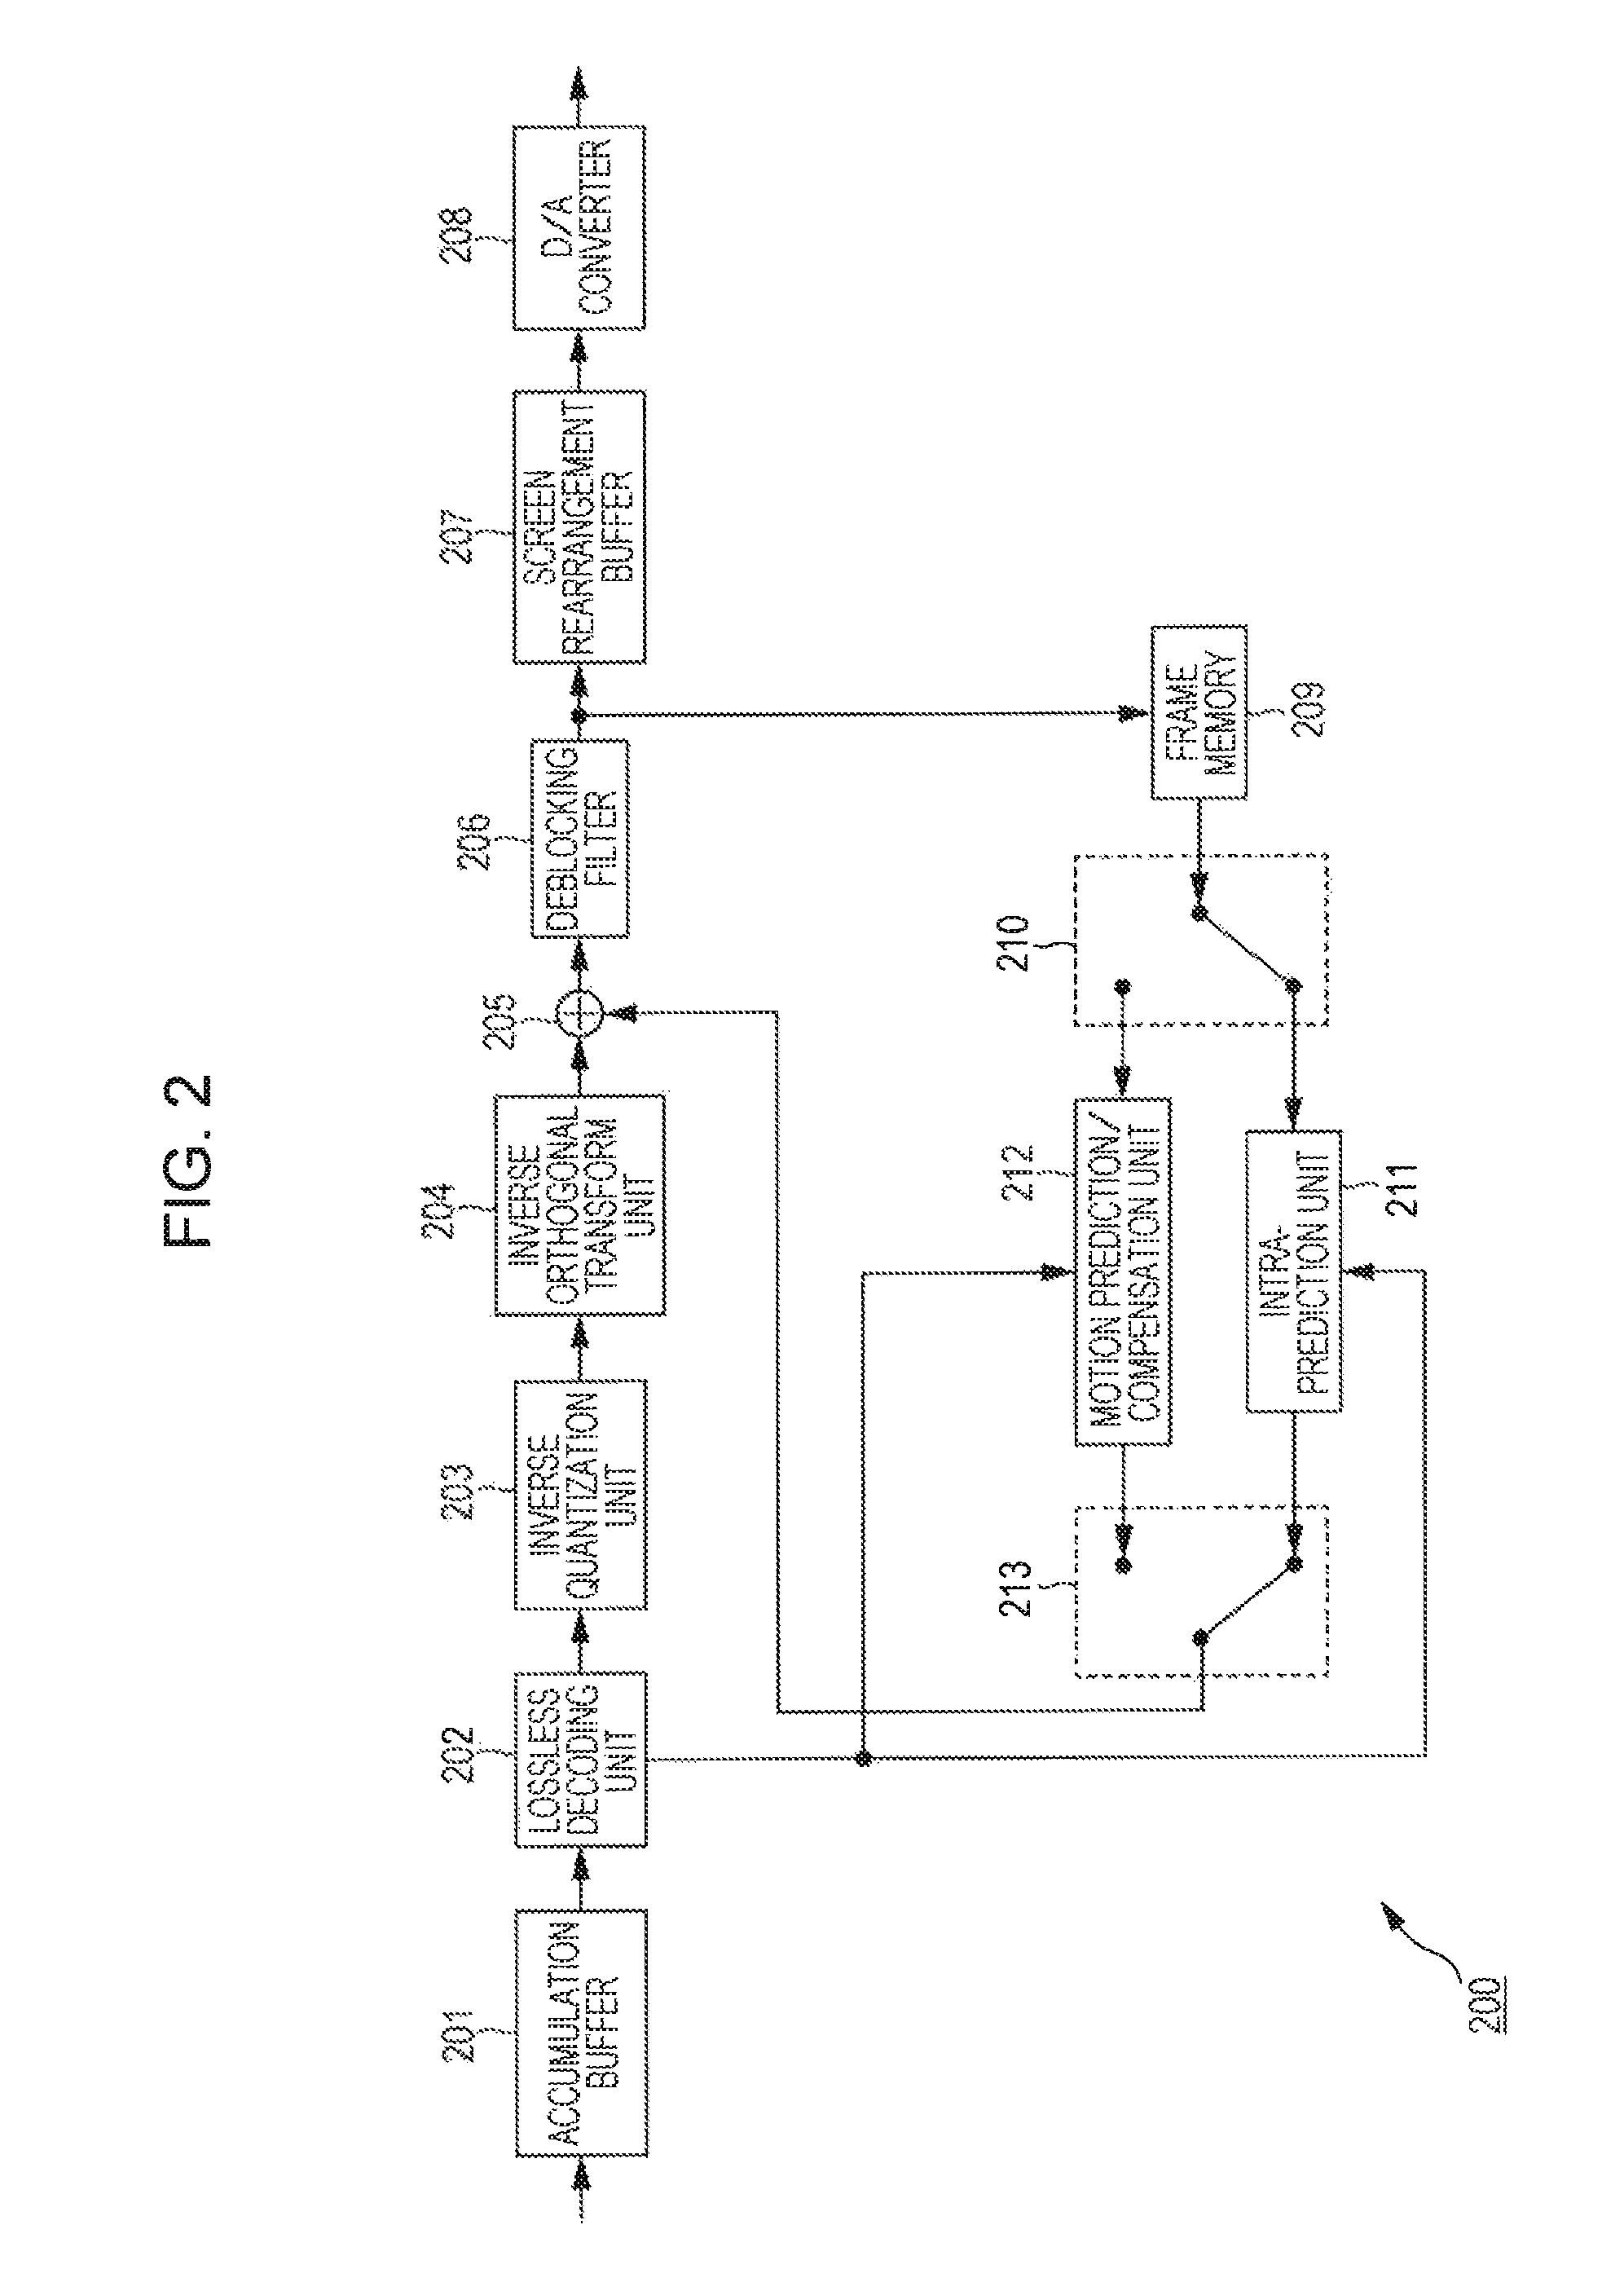 Image processing device and method with hierarchical data structure